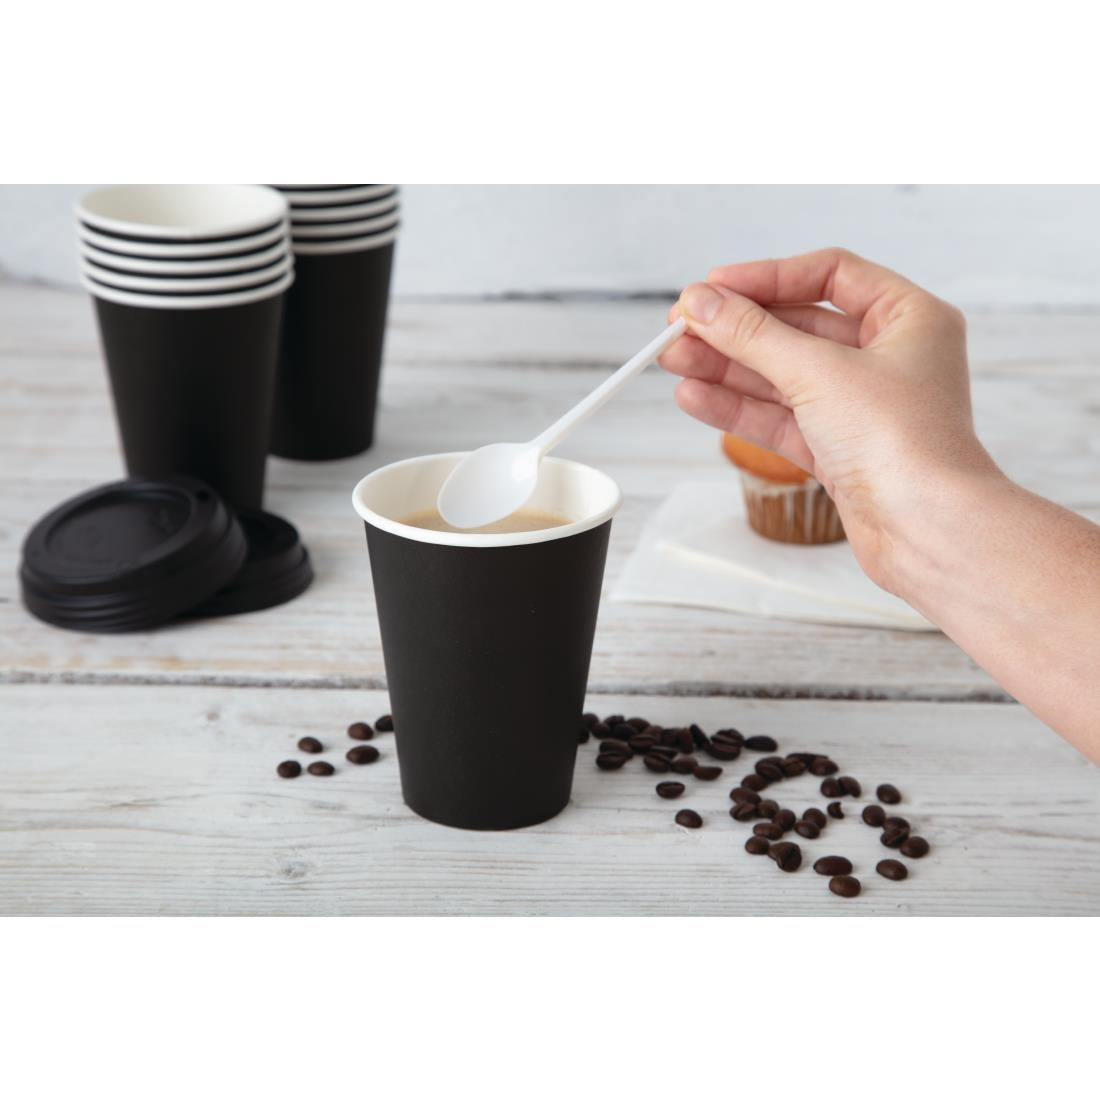 GF043 Fiesta Recyclable Coffee Cups Single Wall Black 340ml / 12oz (Pack of 50) JD Catering Equipment Solutions Ltd